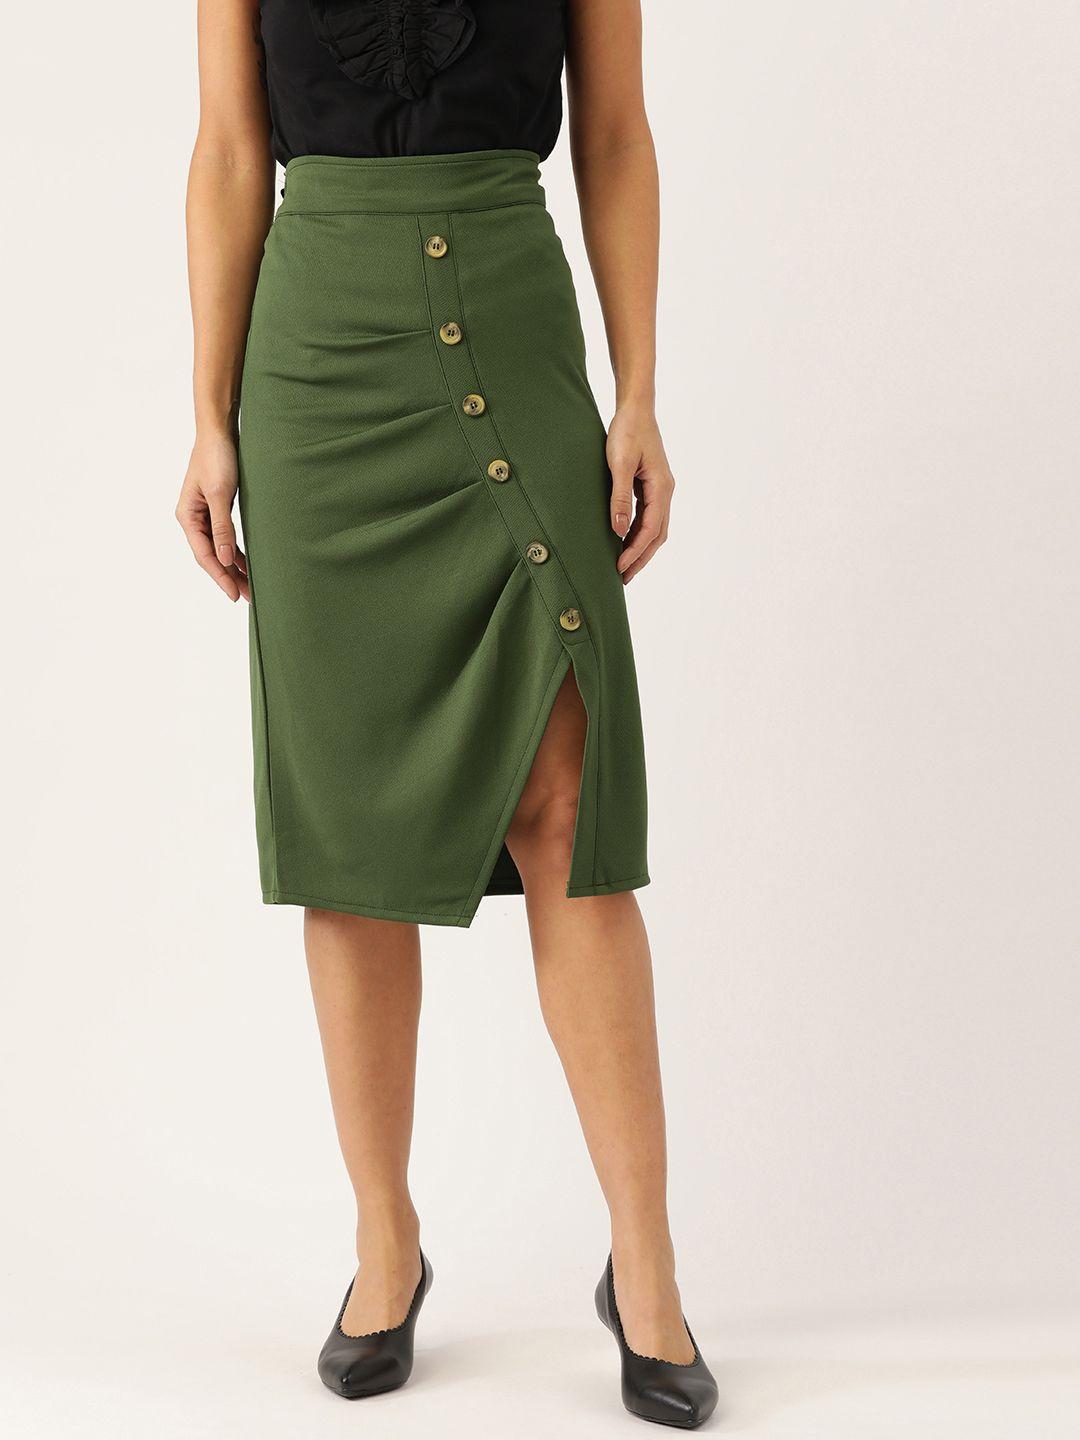 antheaa-women-green-solid-button-down-pleated-fit-pencil-skirt